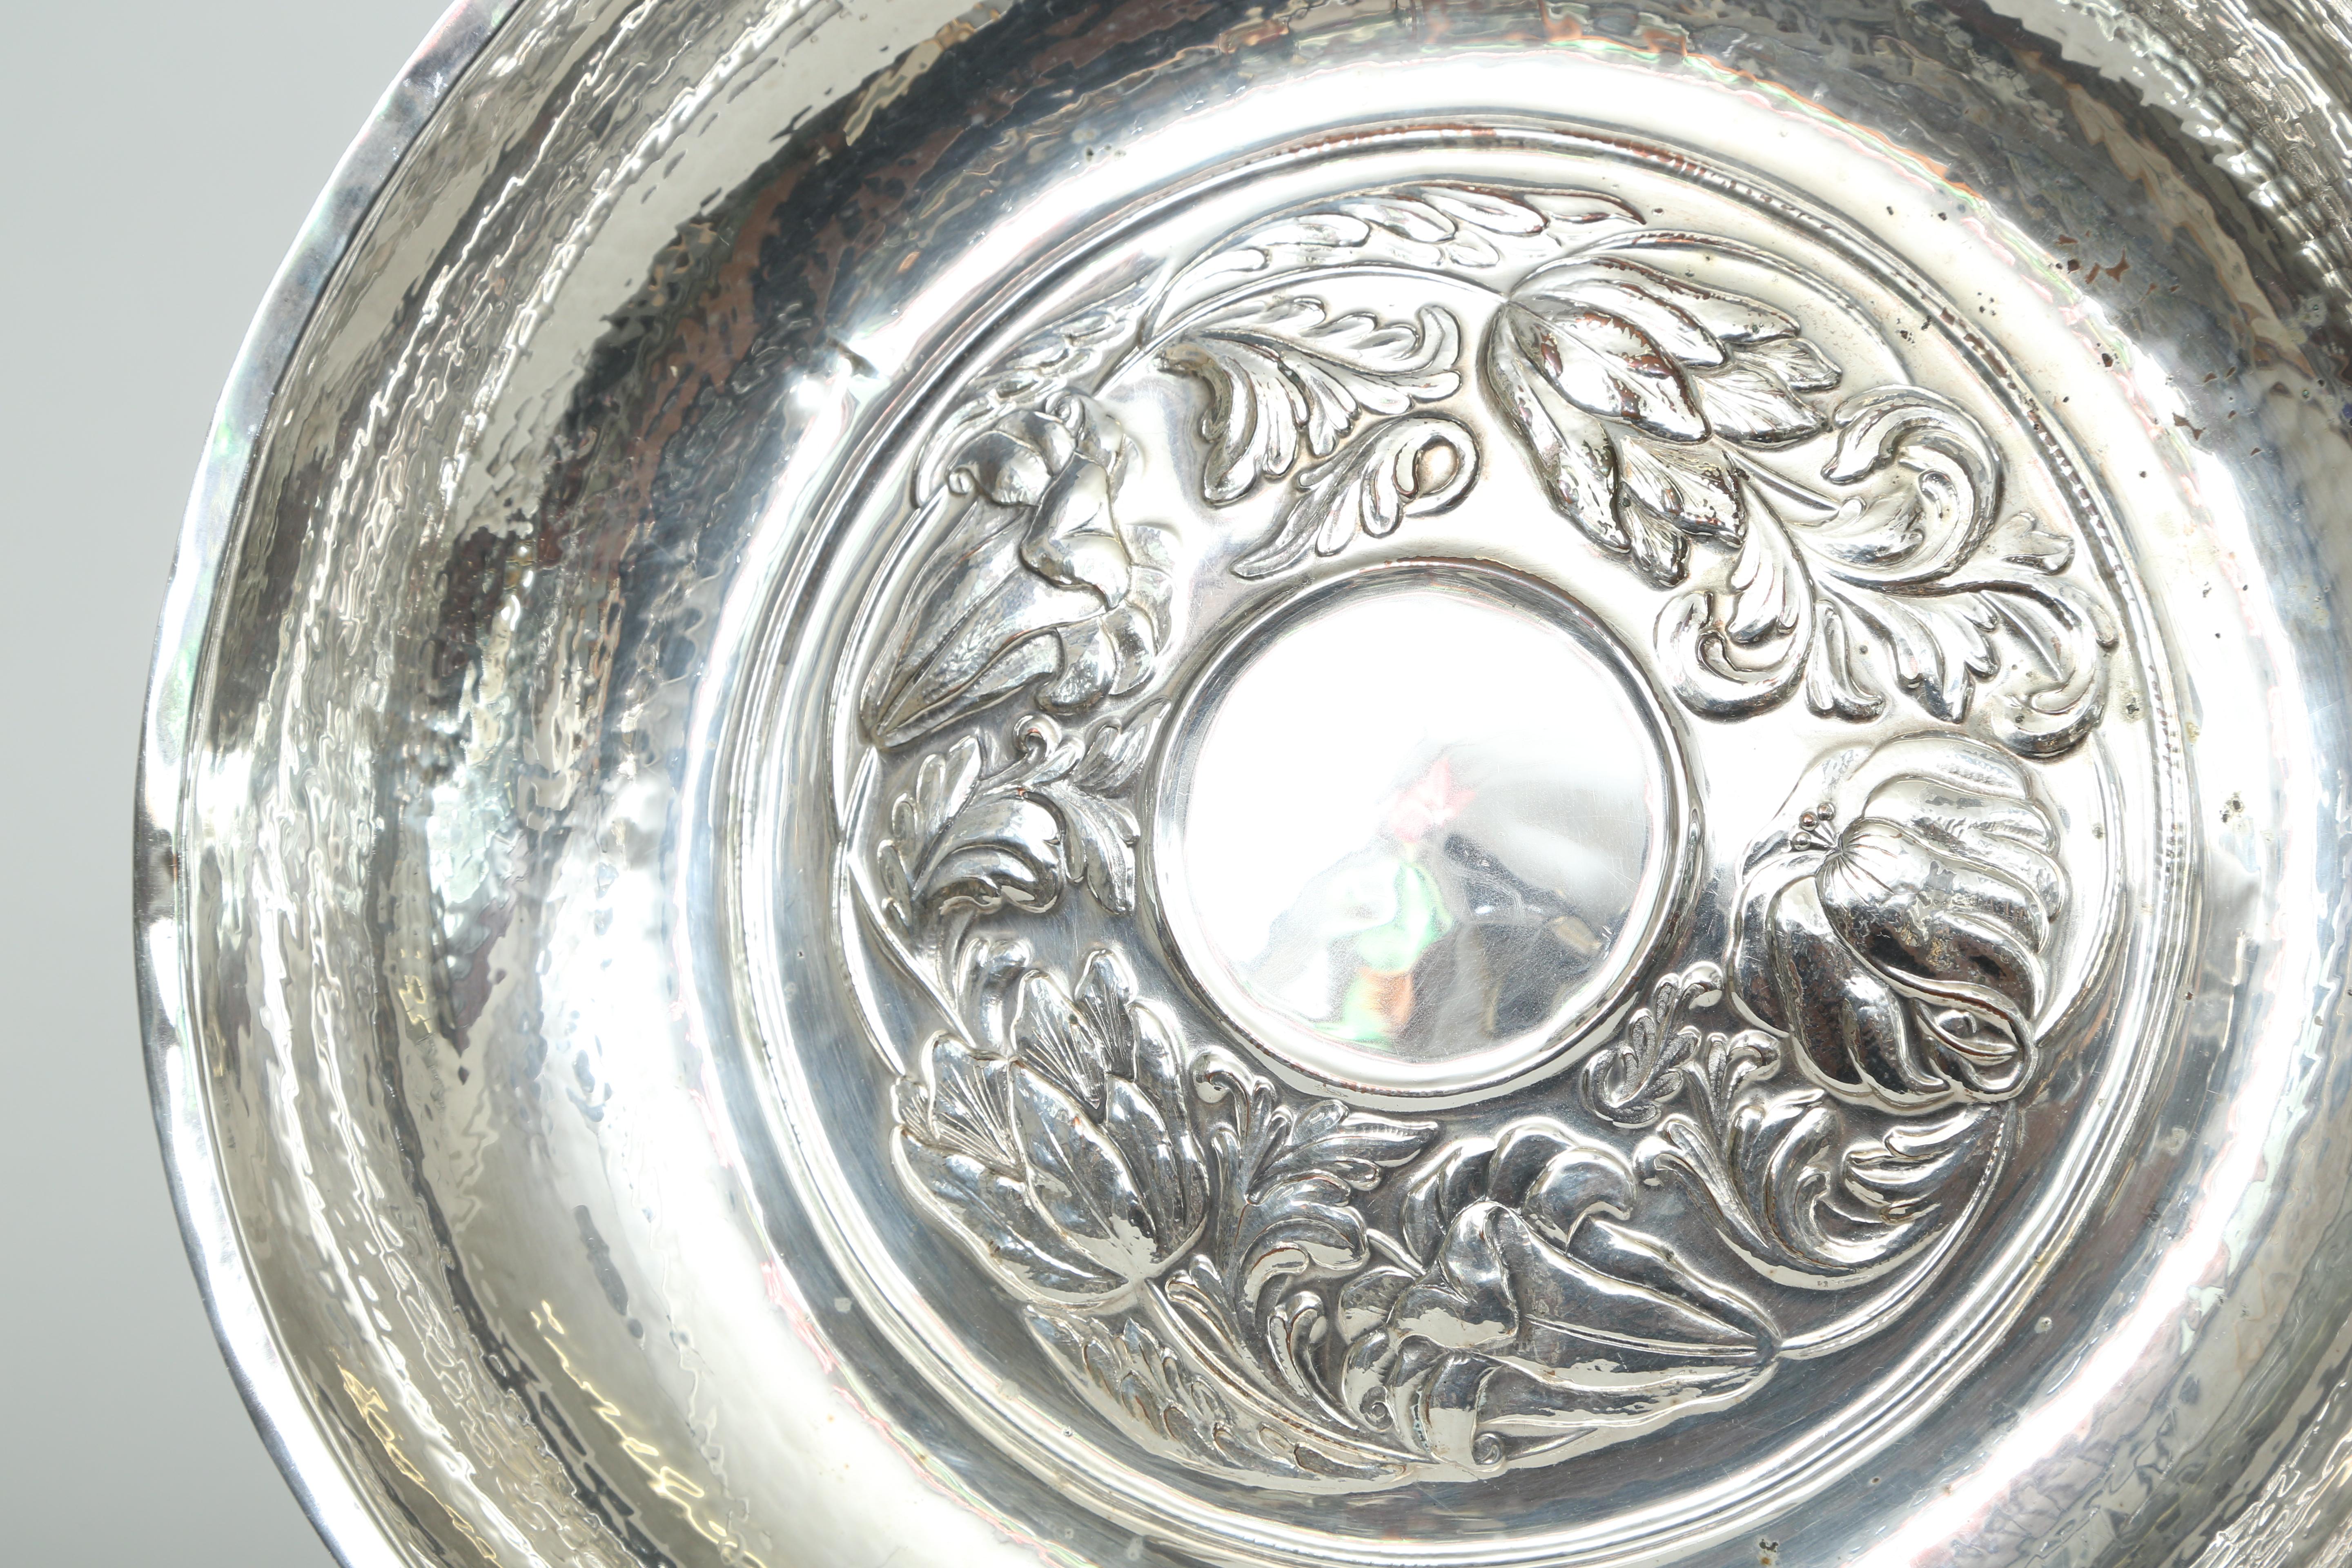 Pair of silver over copper bowls hand crafted during the Arts & Crafts movement. The repoussé pattern is of various flowers and leaves with a hand hammered border. The Duchess of Sutherland's Cripples Guild (D.S.C.G. under a crown) started by